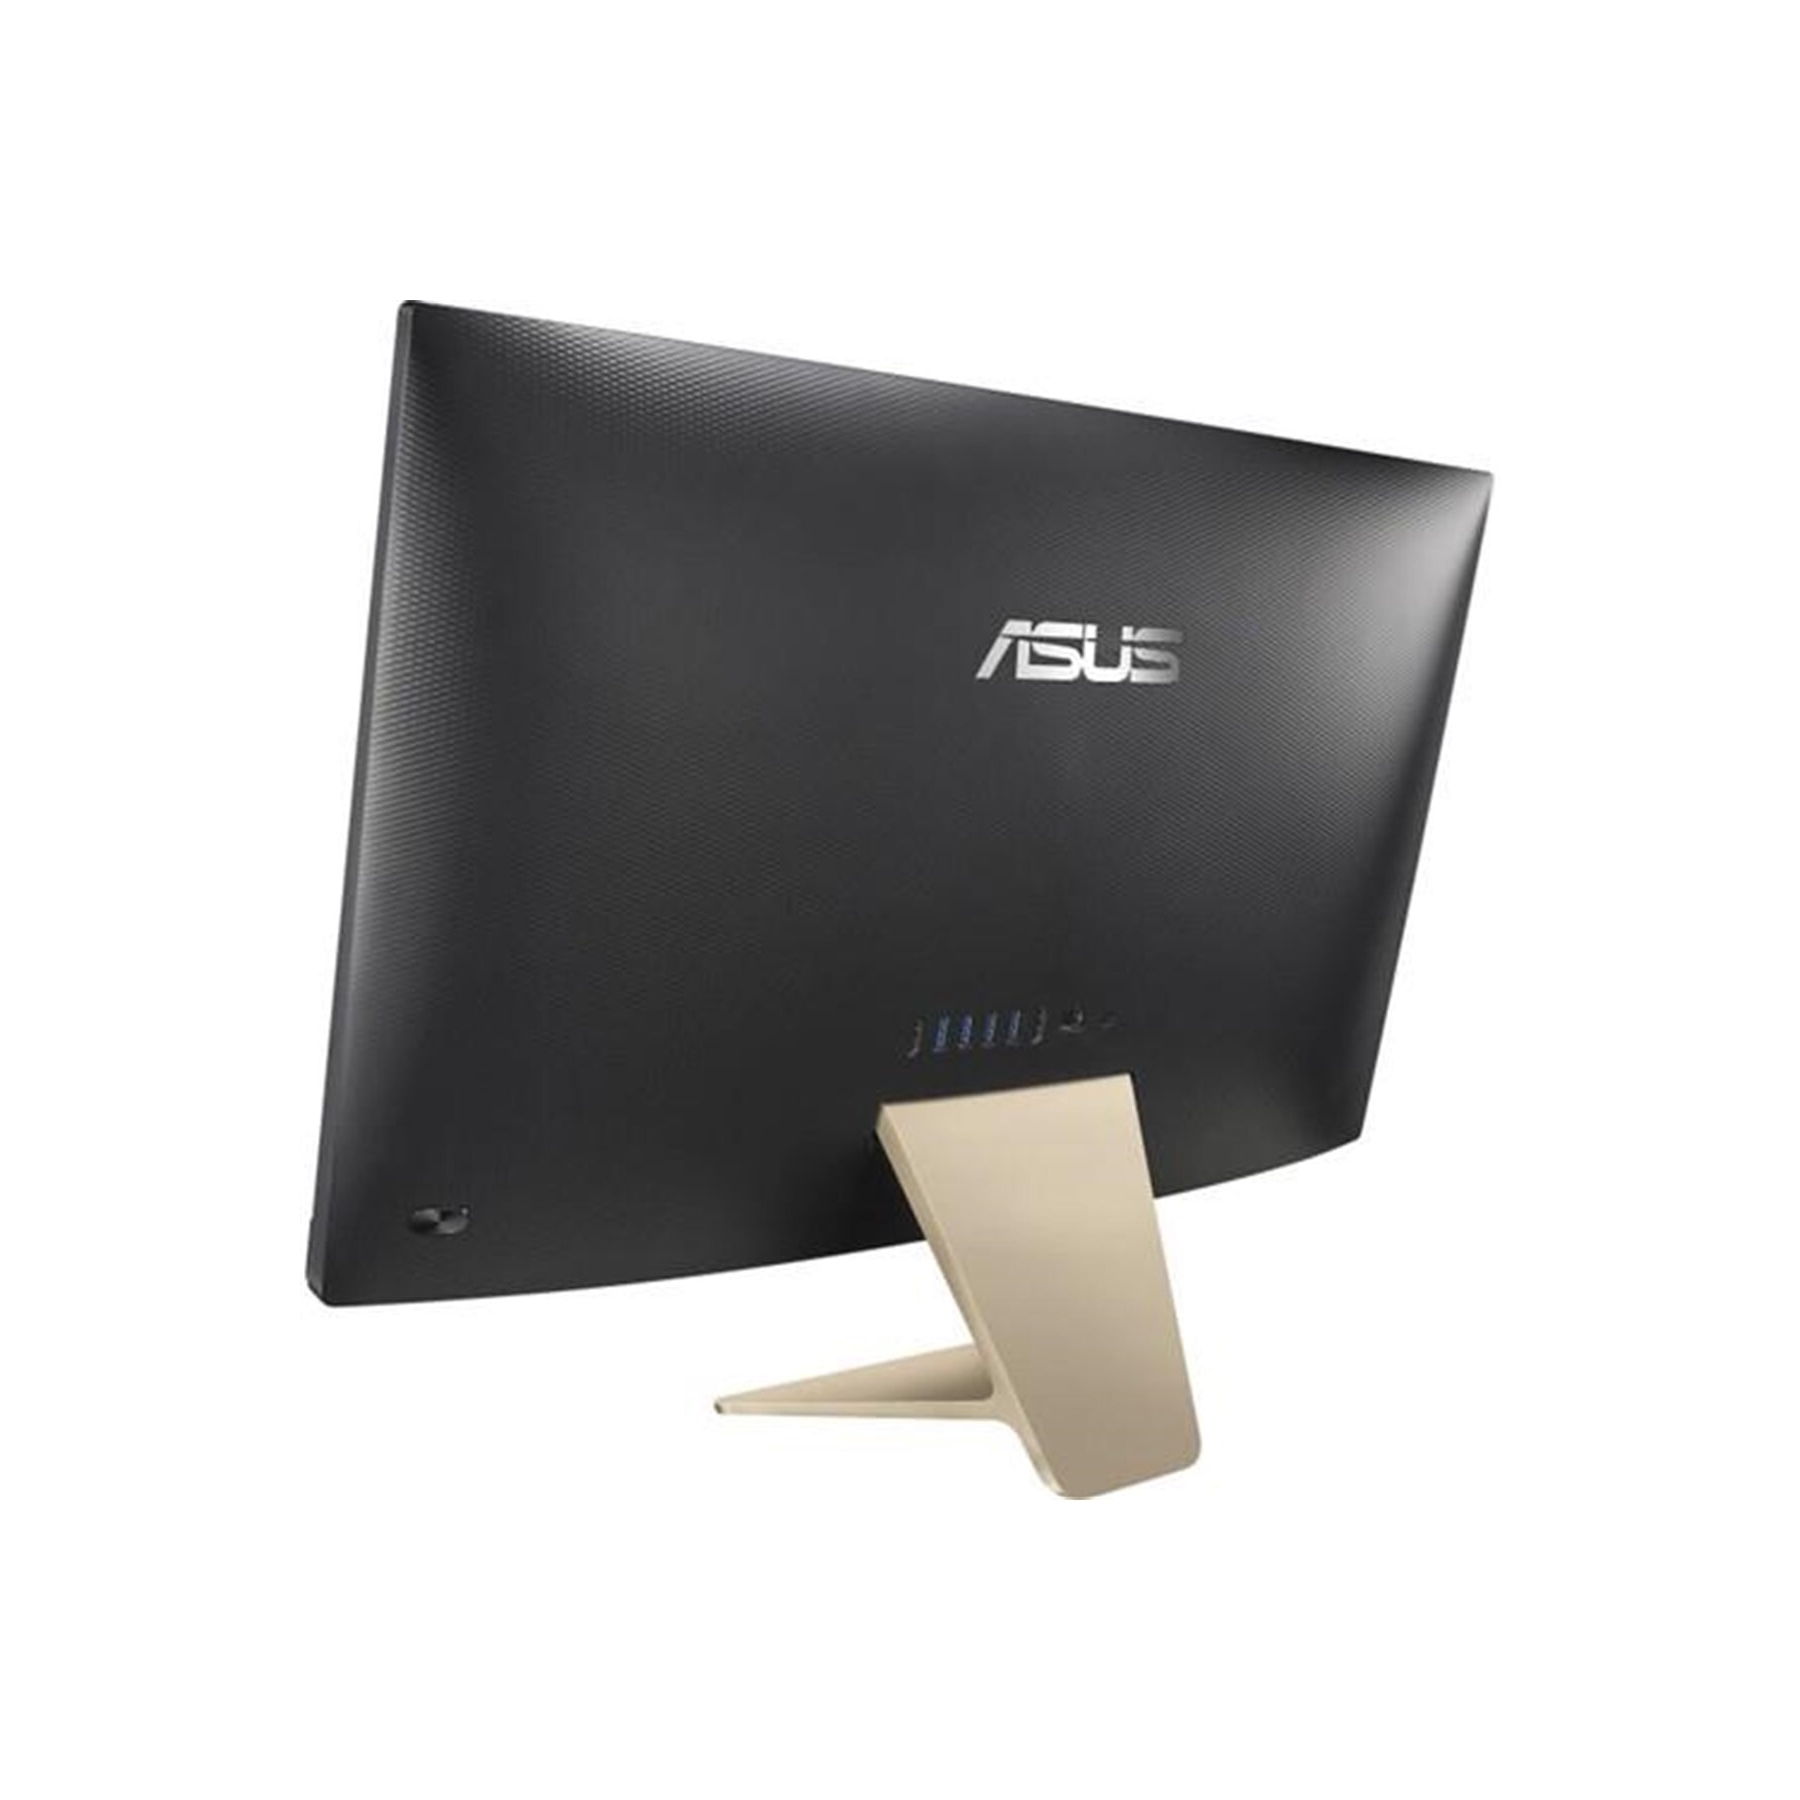 ASUS%20V241EAK-BA041M%20I5-1135G7%208GB%20256GB%20SSD%20O/B%20VGA%2023.8’’%20FHD%20NONTOUCH%20FREE-DOS%20ALL%20IN%20ONE%20PC